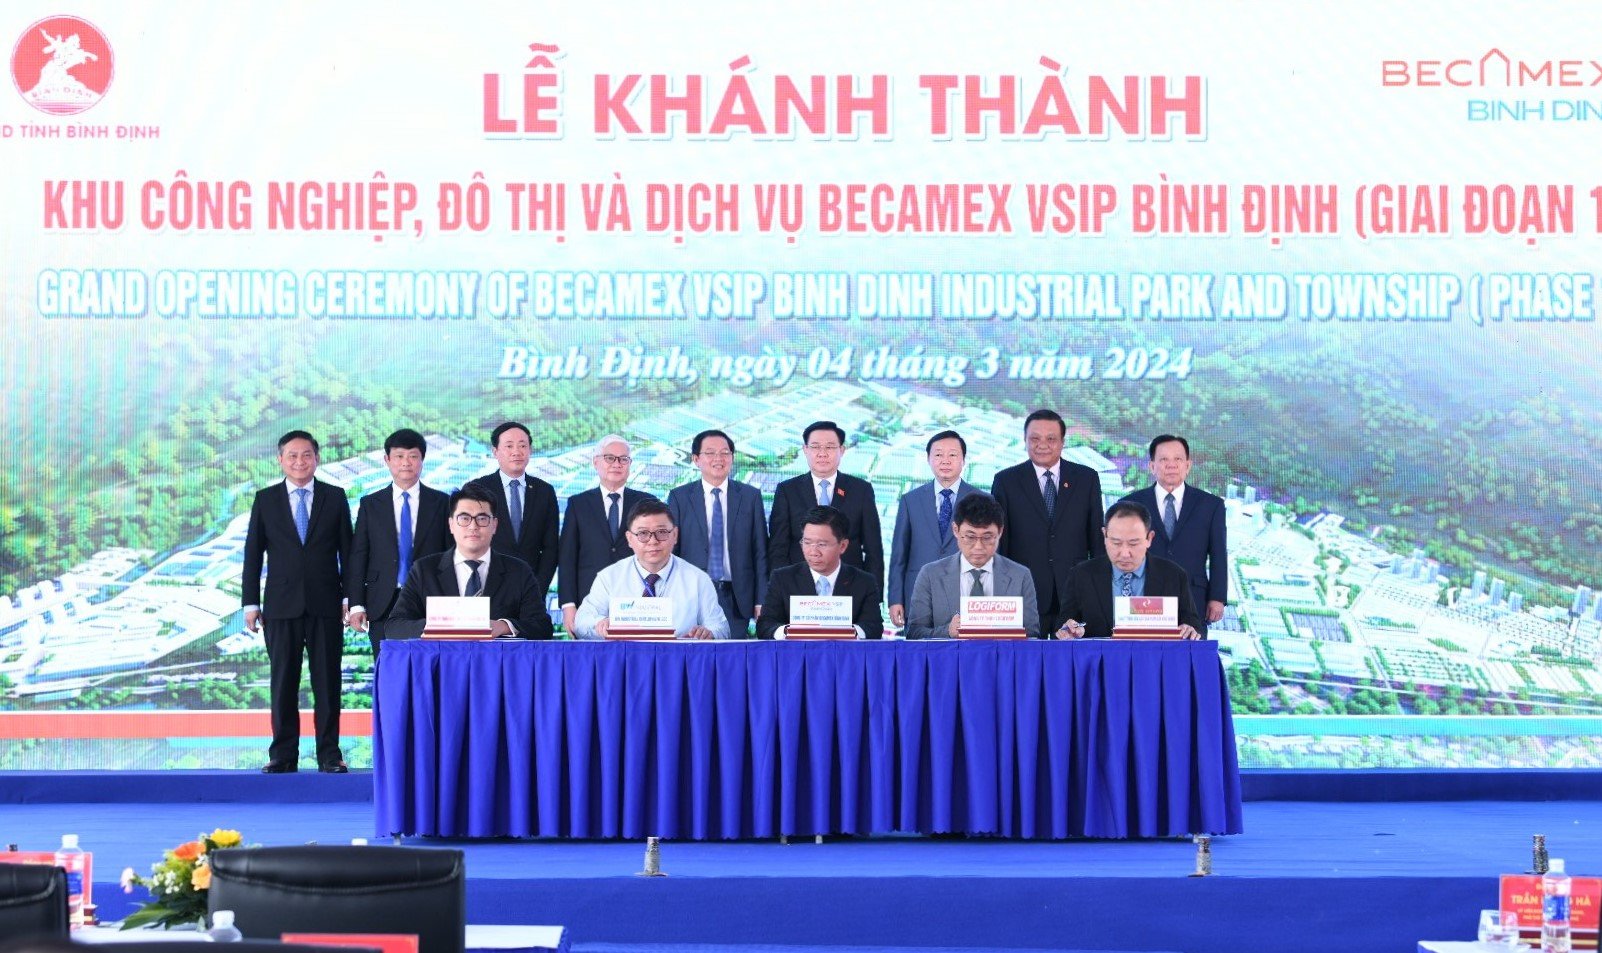 National Assembly Chairman Vuong Dinh Hue (standing, fourth right) and Deputy Prime Minister Tran Hong Ha (standing, third right) attend the inauguration of Becamex VSIP Binh Dinh in the eponymous central Vietnam province, March 4, 2024. Photo courtesy of Dai Bieu Nhan Dan (People's Representatives) newspaper.